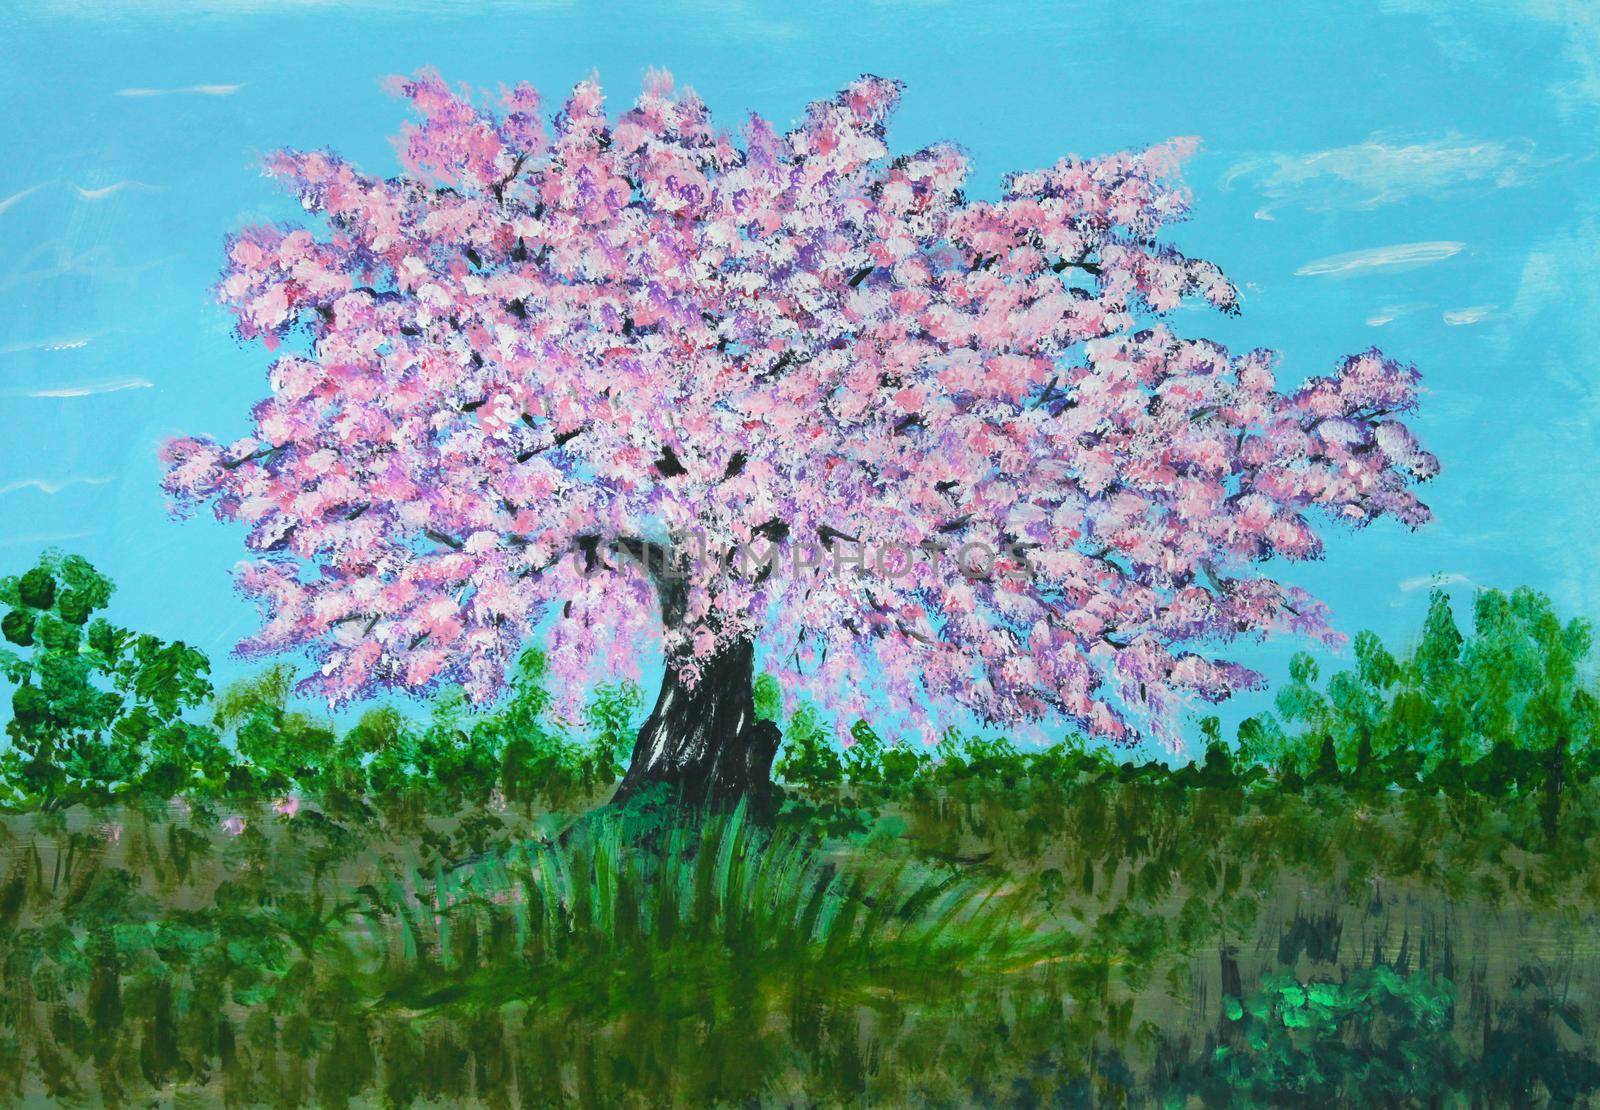 Oil painting on canvas of lone pink sakura cherry tree in bloom in middle of green field